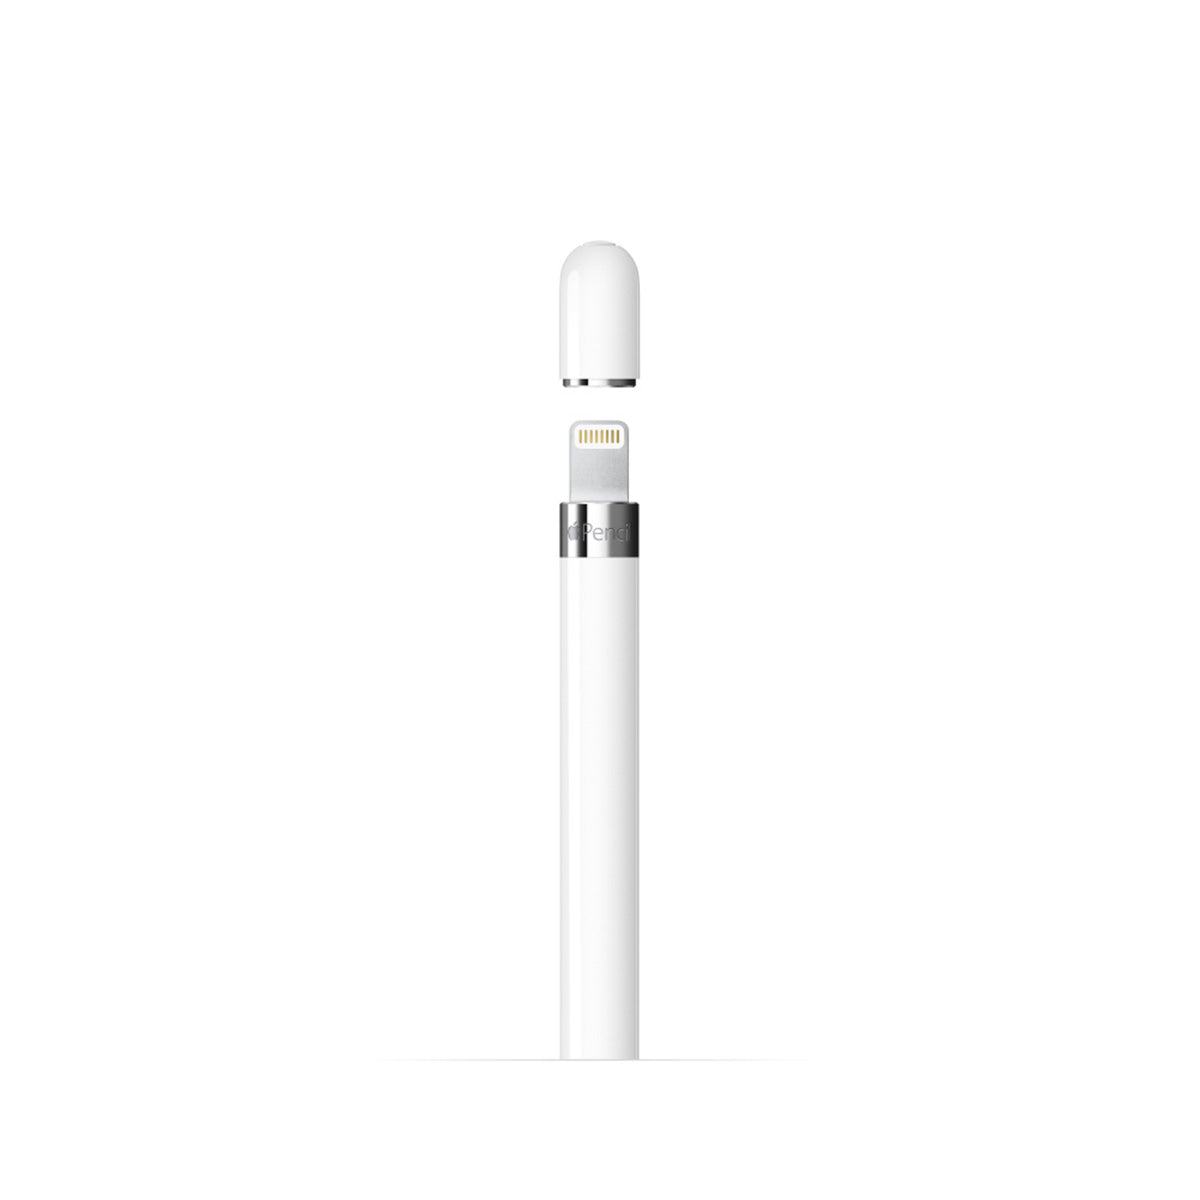 Apple Pencil 1 (with USB-C to Apple Pencil Adapter)